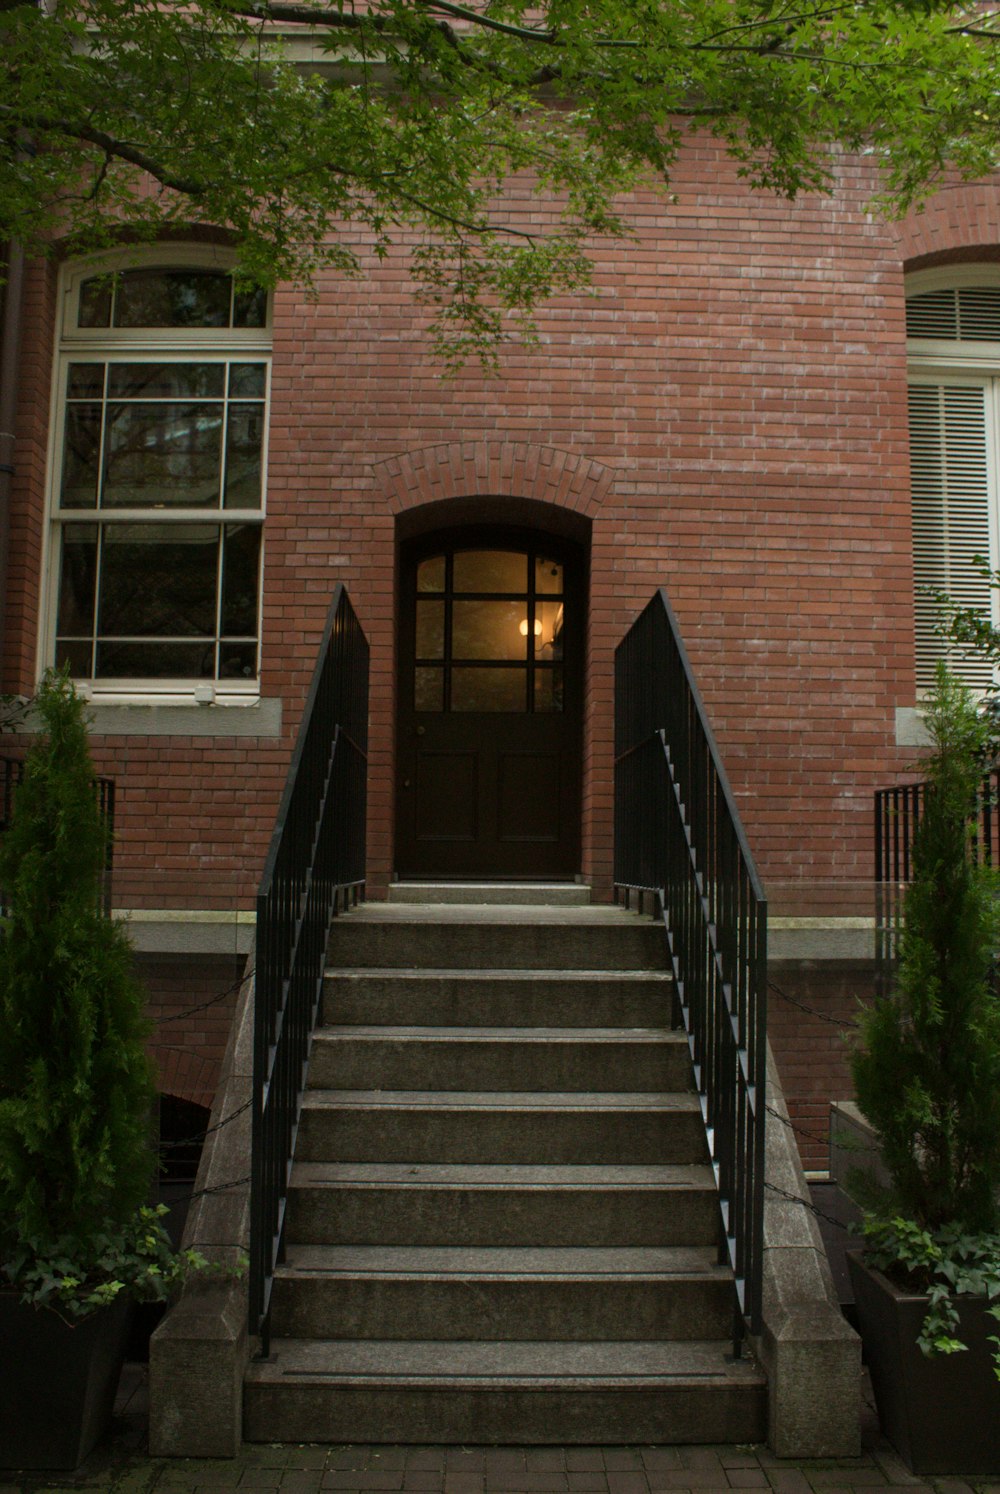 a set of stairs leading up to a brick building